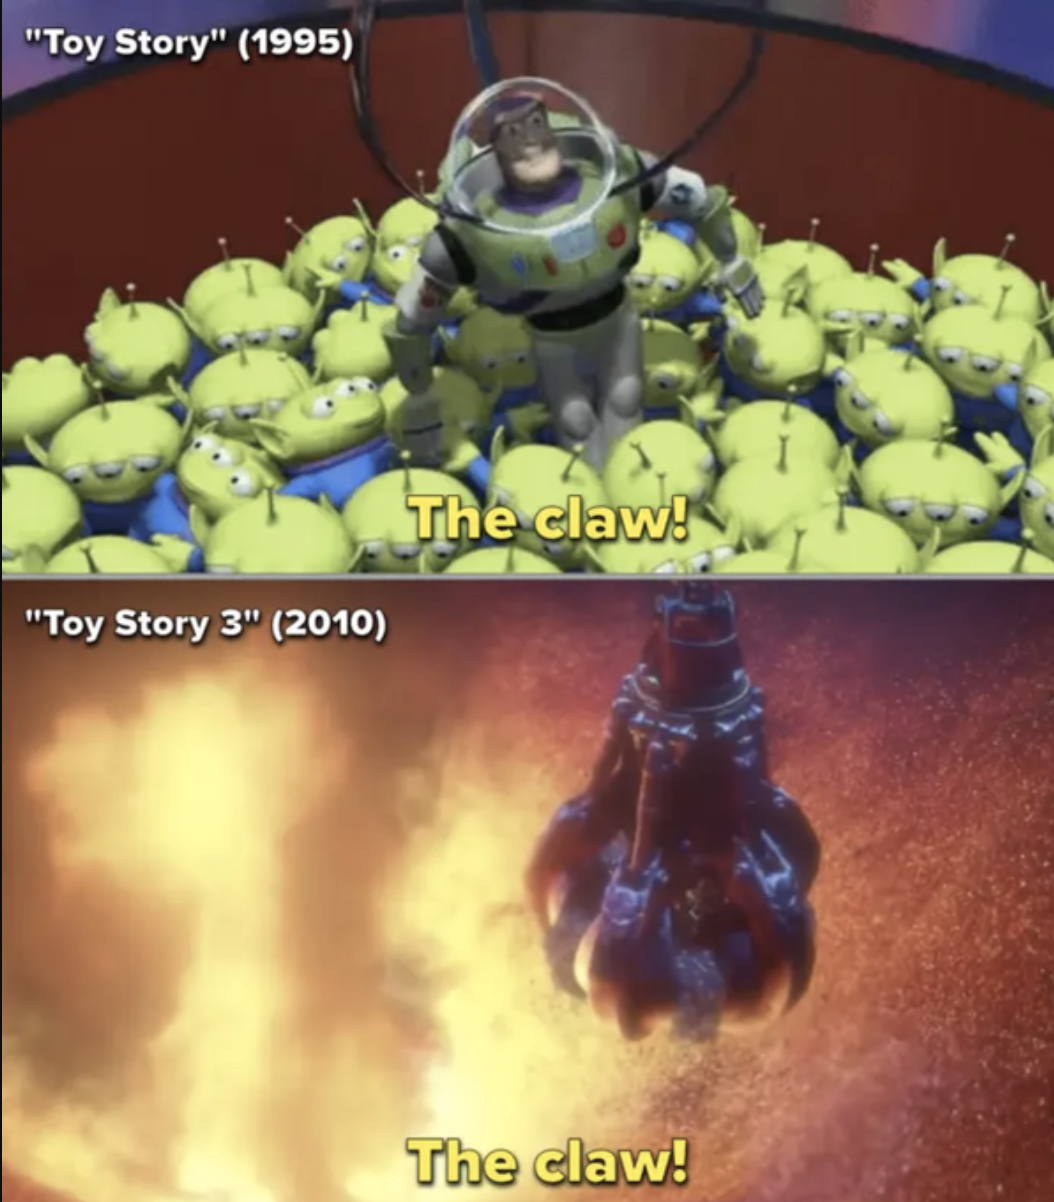 Side-by-side of the aliens in the first &quot;Toy Story&quot; movie, vs. the third movie where the aliens used the claw to save everyone